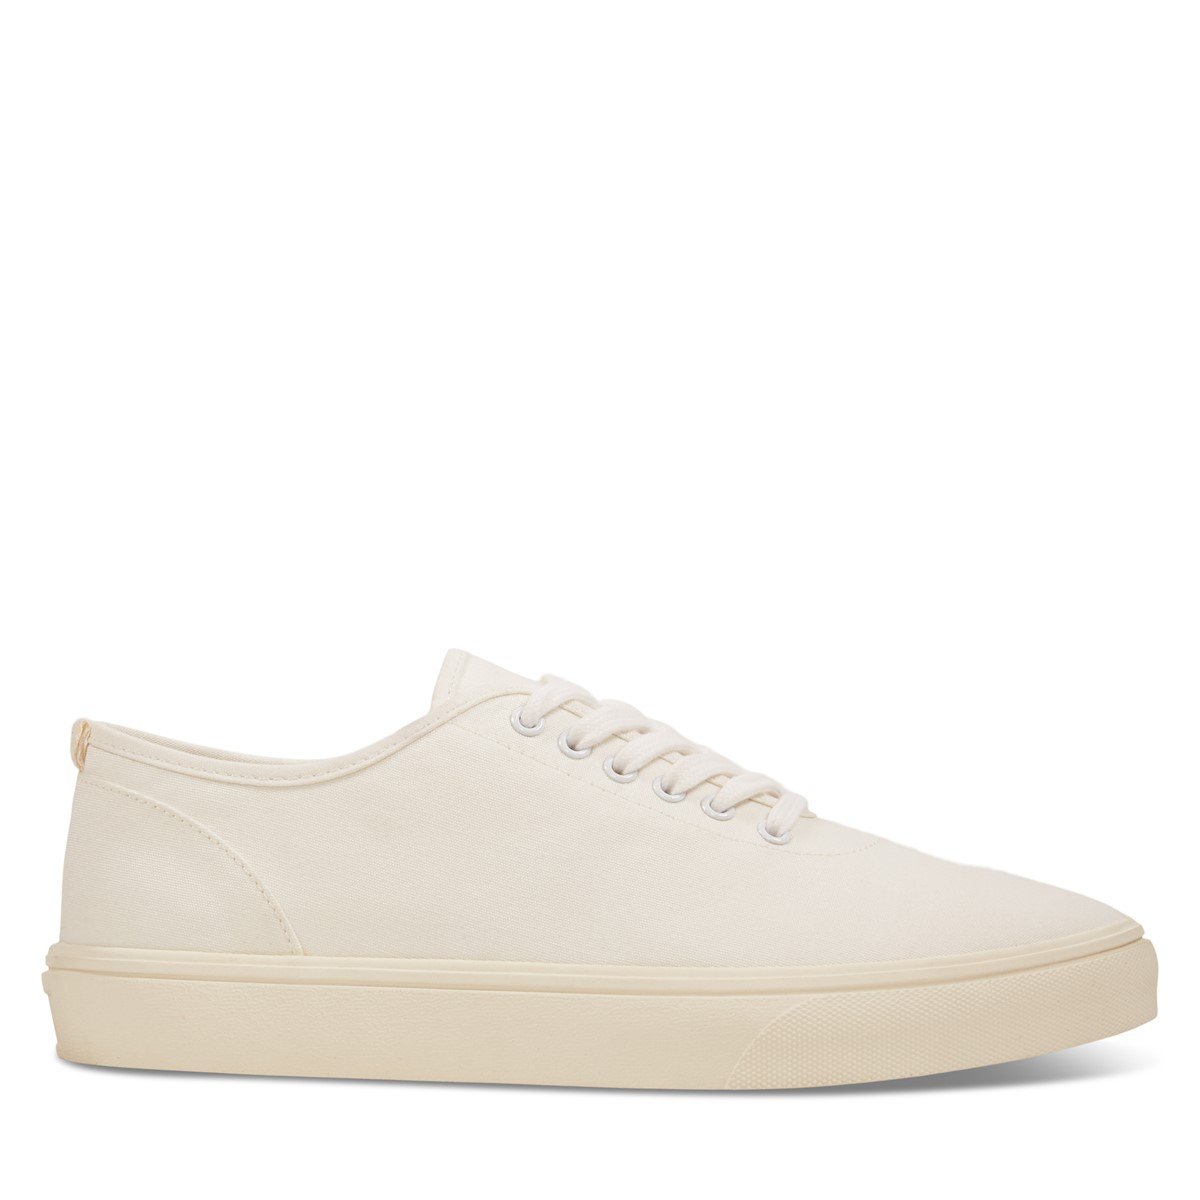 Women's Lennox Lace-Up Shoes in White